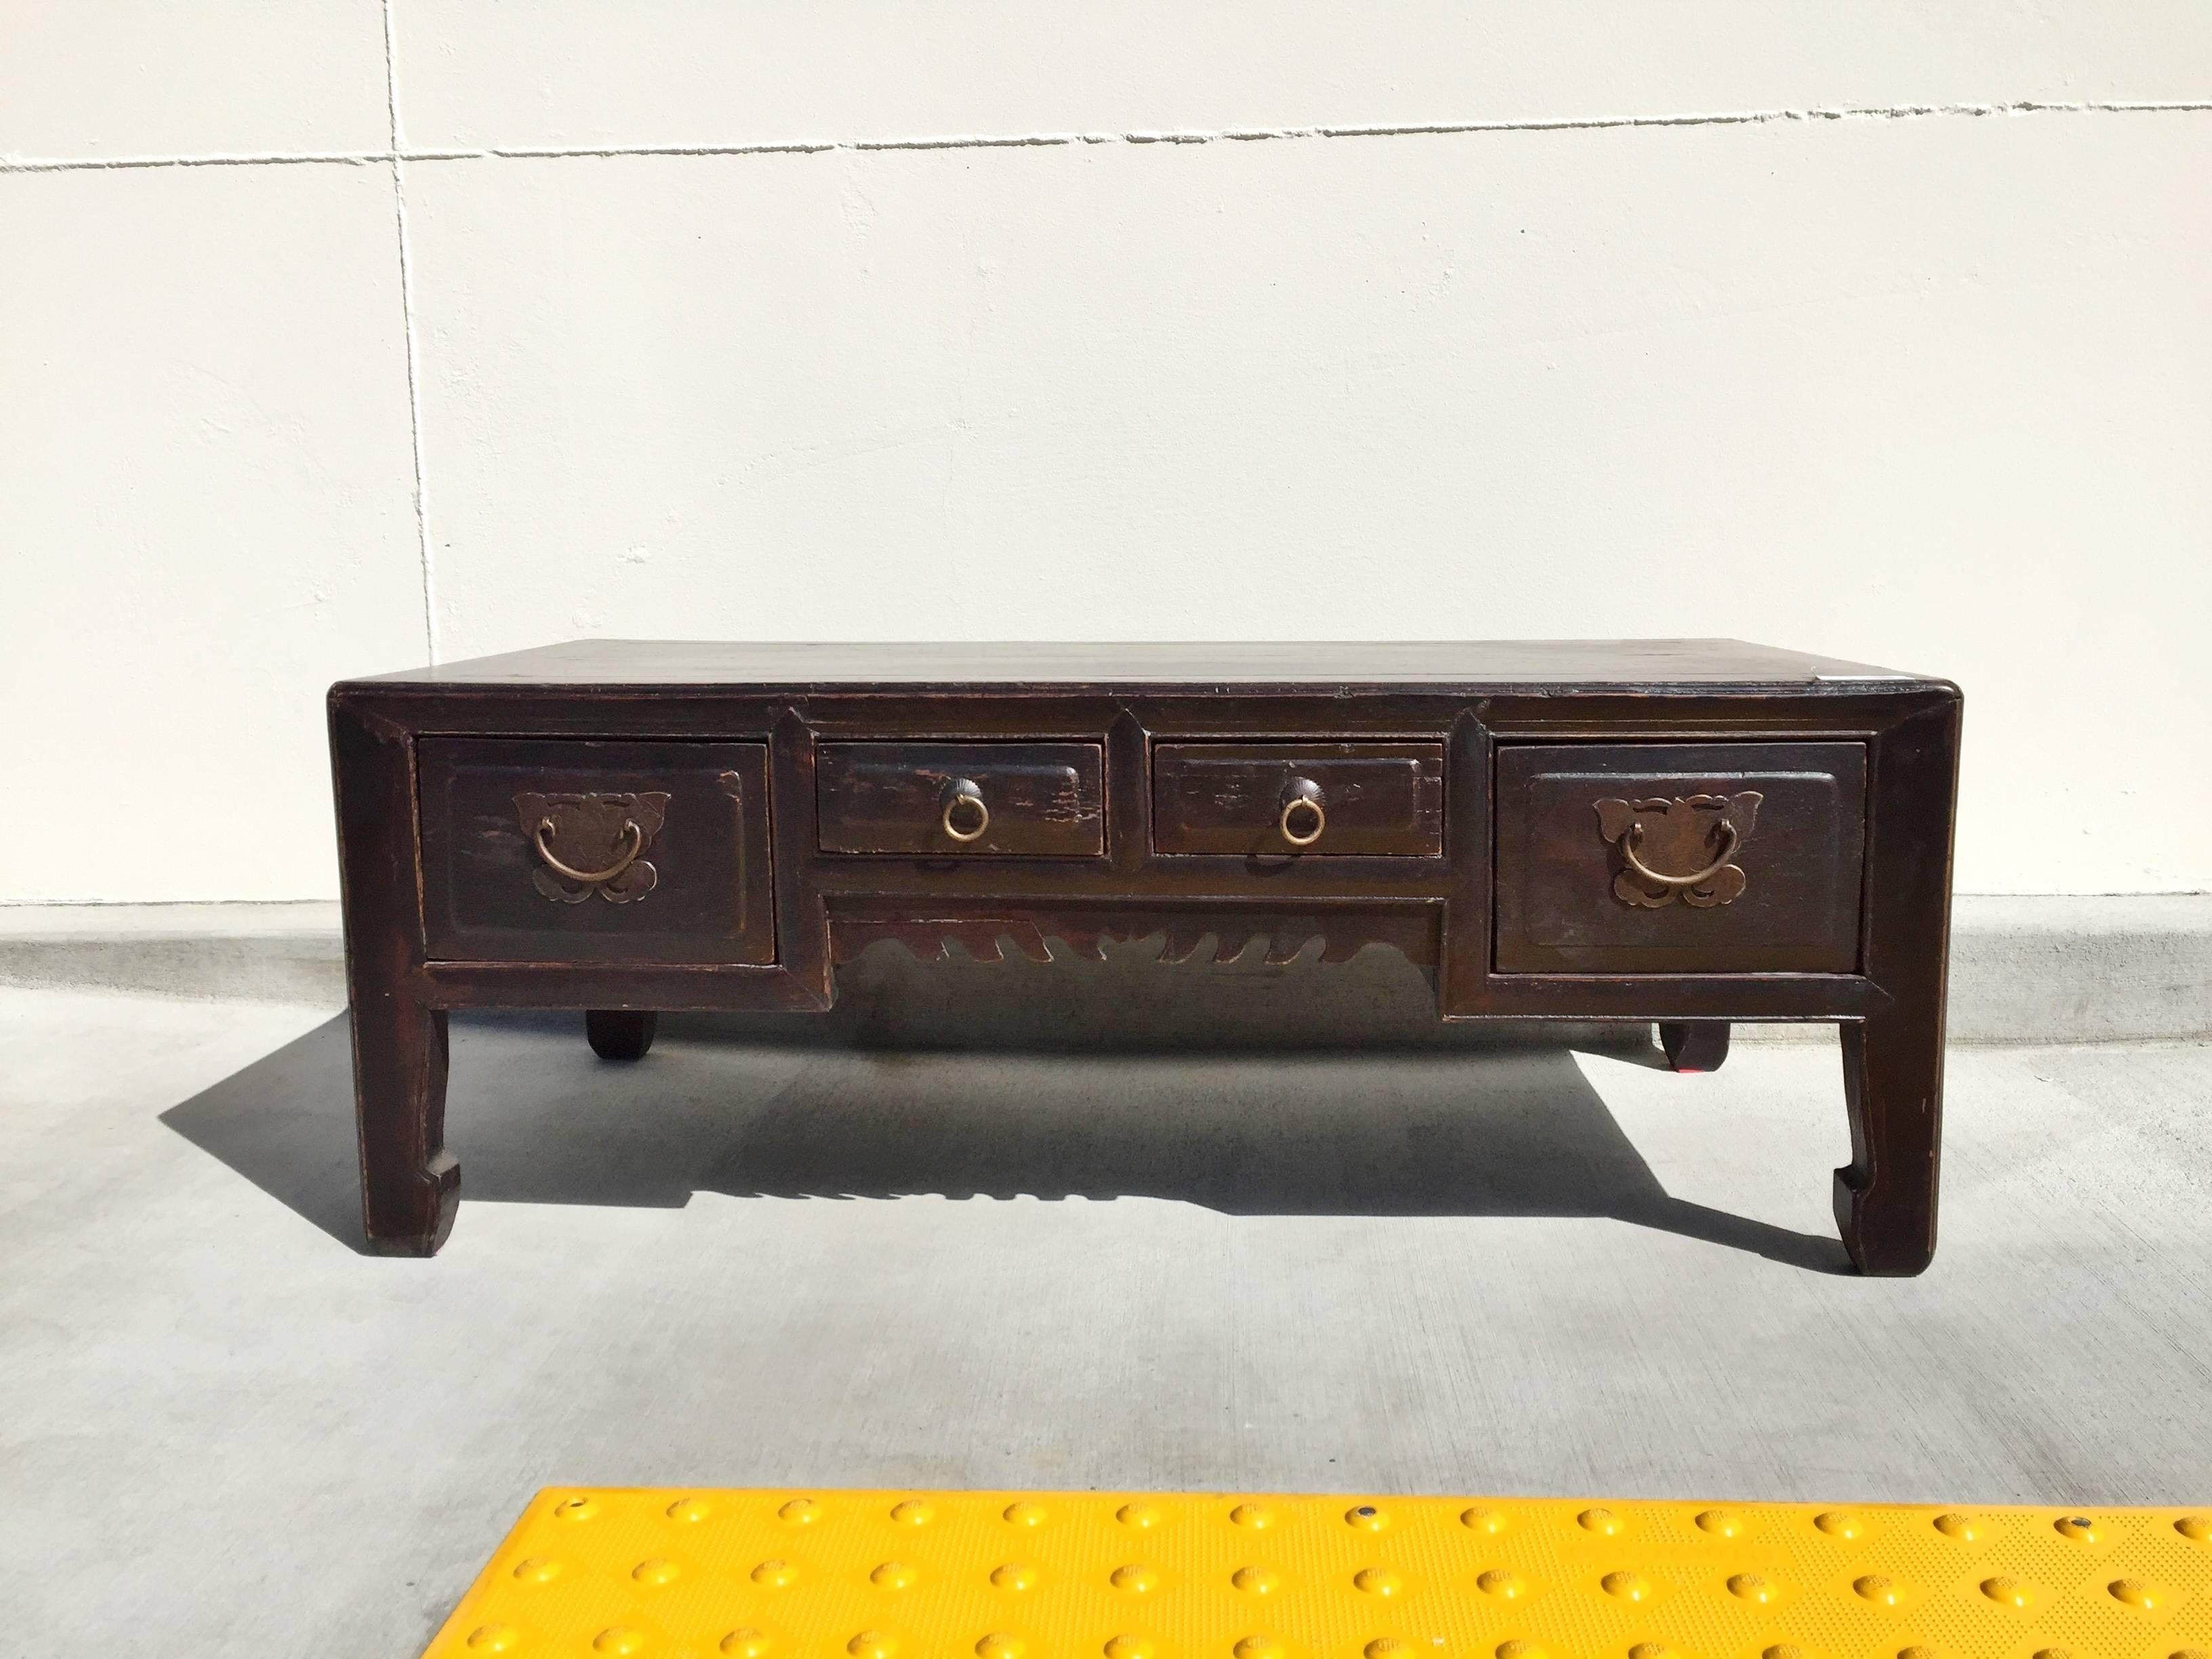 19th century Chinese low table features four full length drawers adorned with bronze butterfly hardware. Beautiful hoof legs give the nod to Ming dynasty.

Perfect coffee table or as a stand for your sculpture or statues.

Solid wood. Tenons and